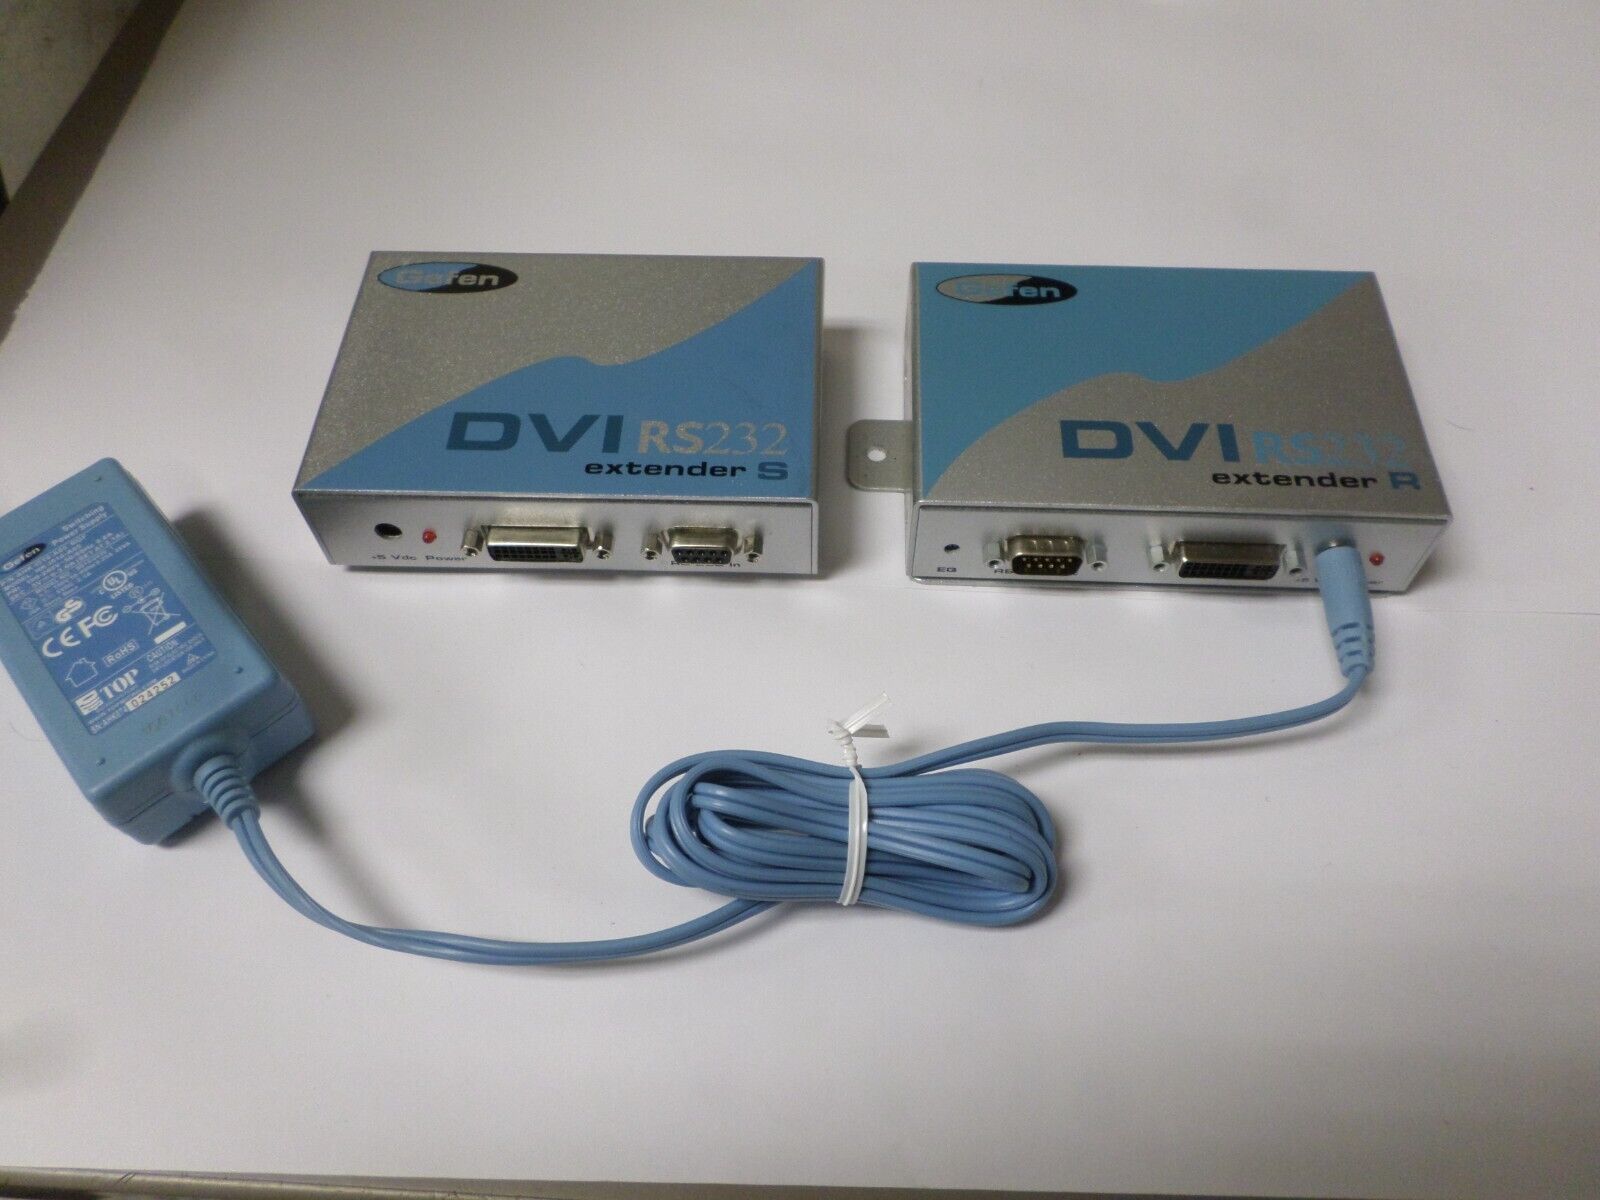 Lot of 2 Gefen DVI RS-232 Cat-5 Extenders, One (S), One (R)